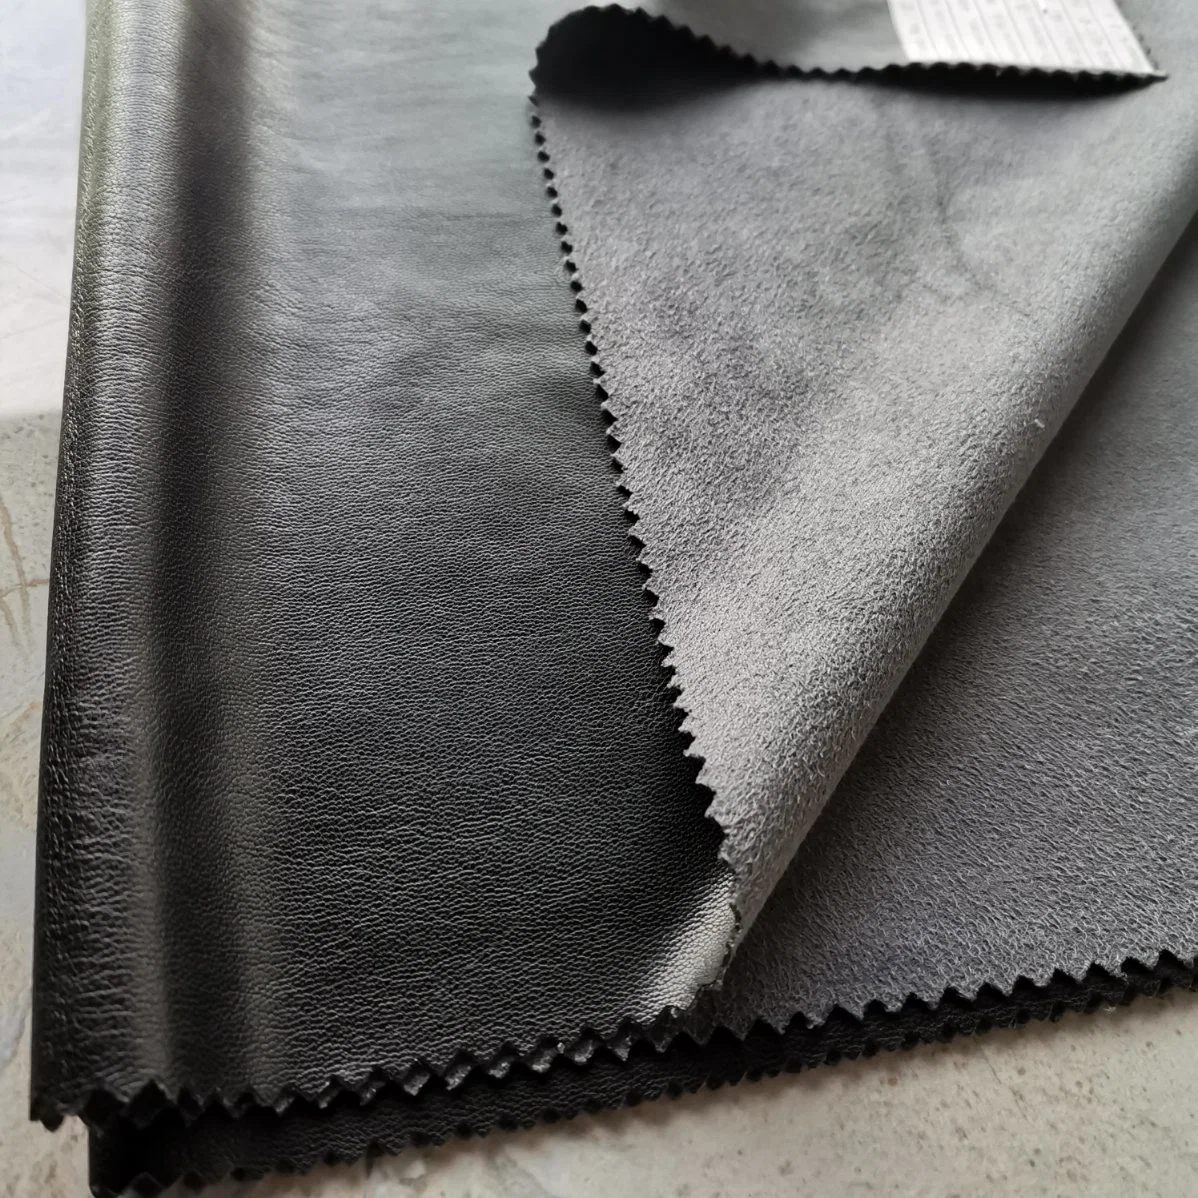 DMF Free Recycled PU Leather with Grs Certificate for Garment